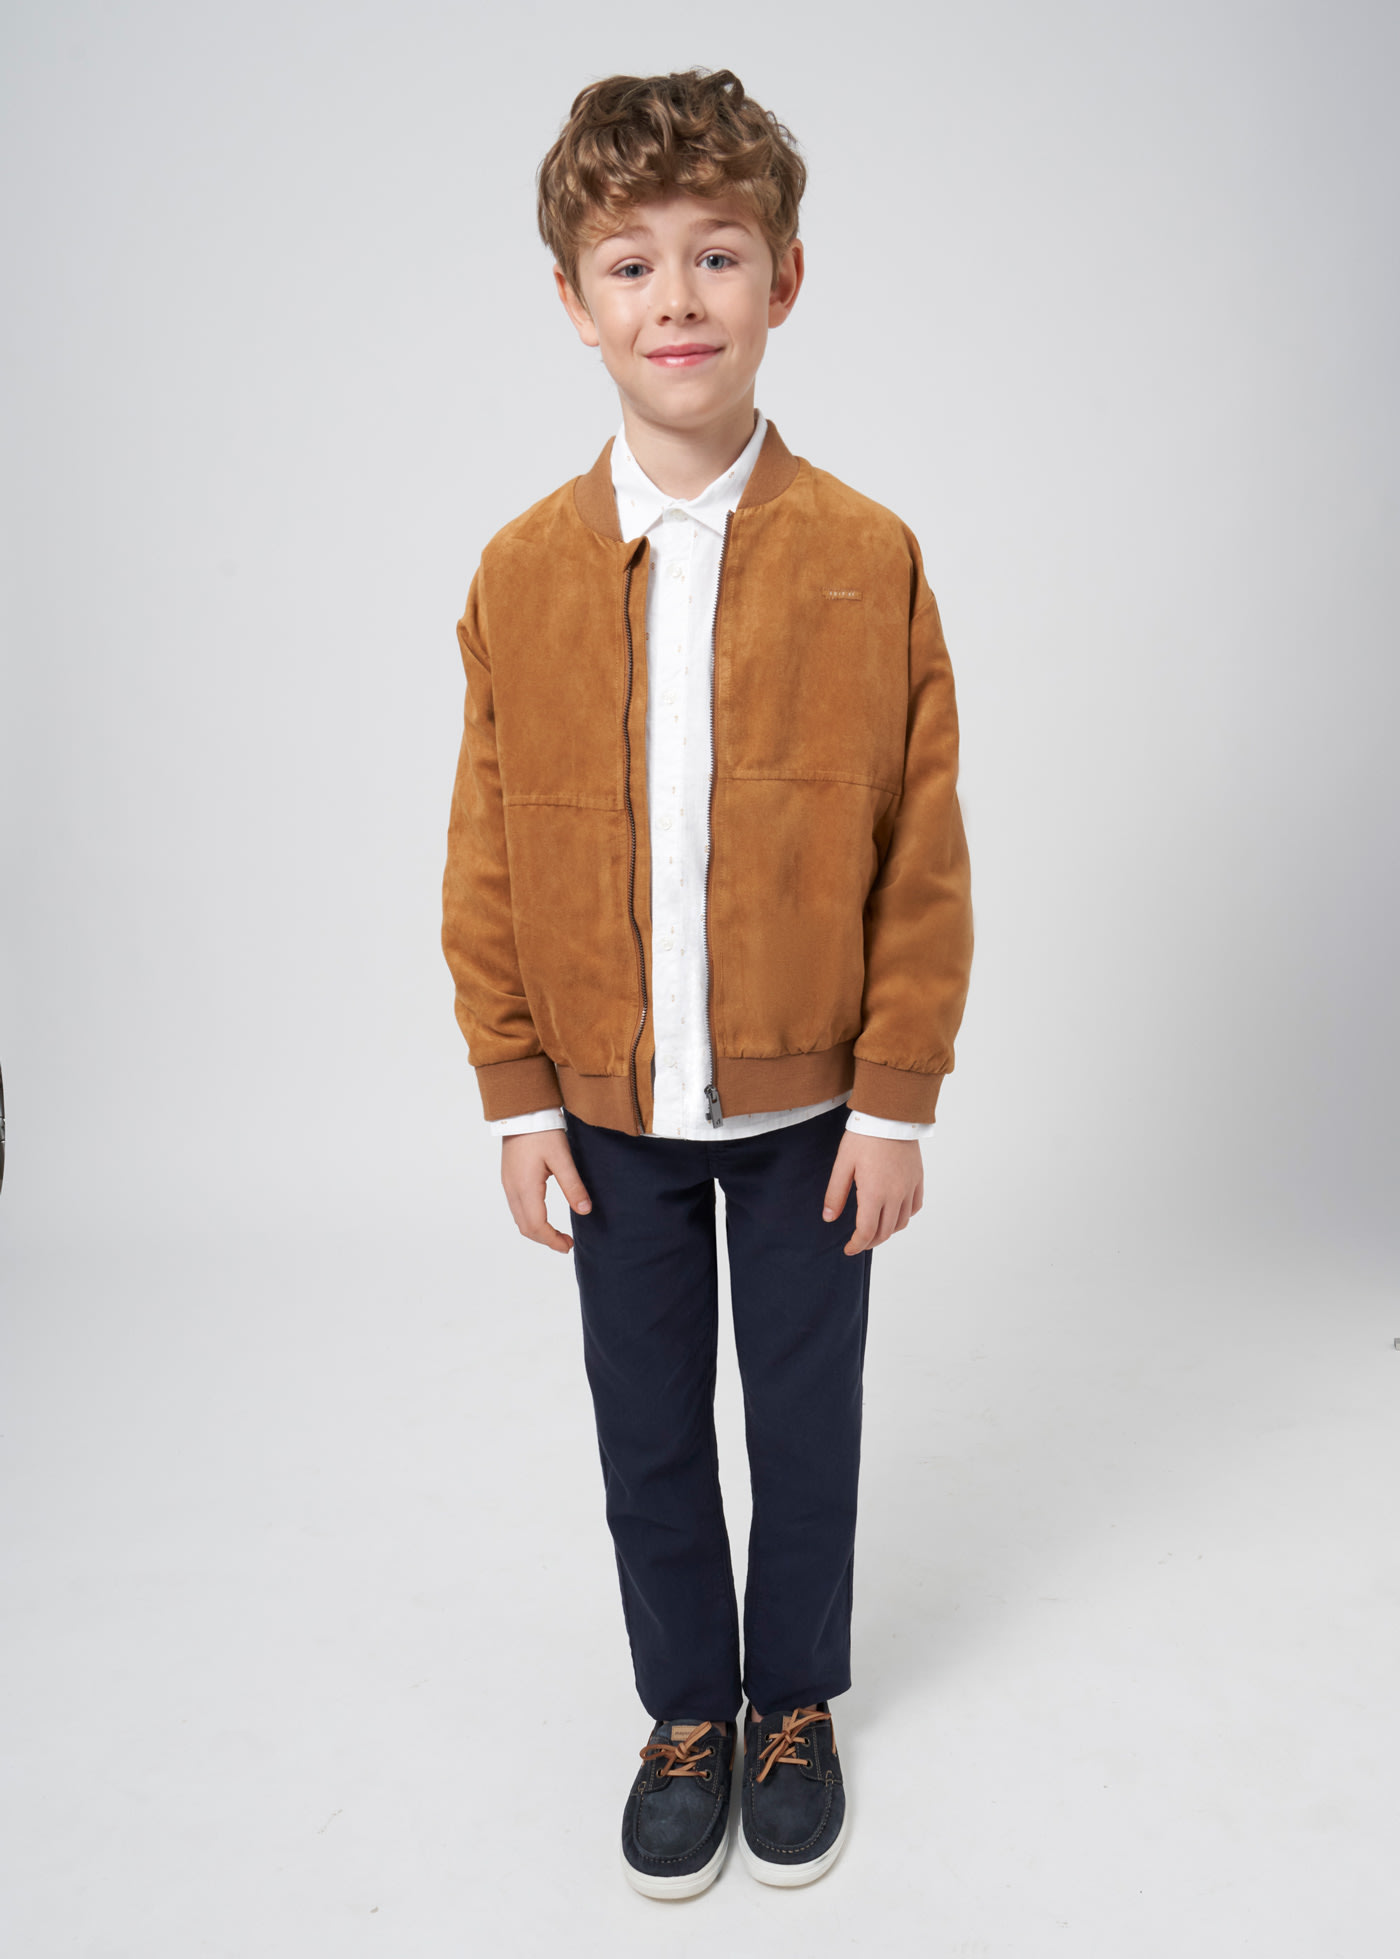 Boy Tailored Chino Trousers Better Cotton